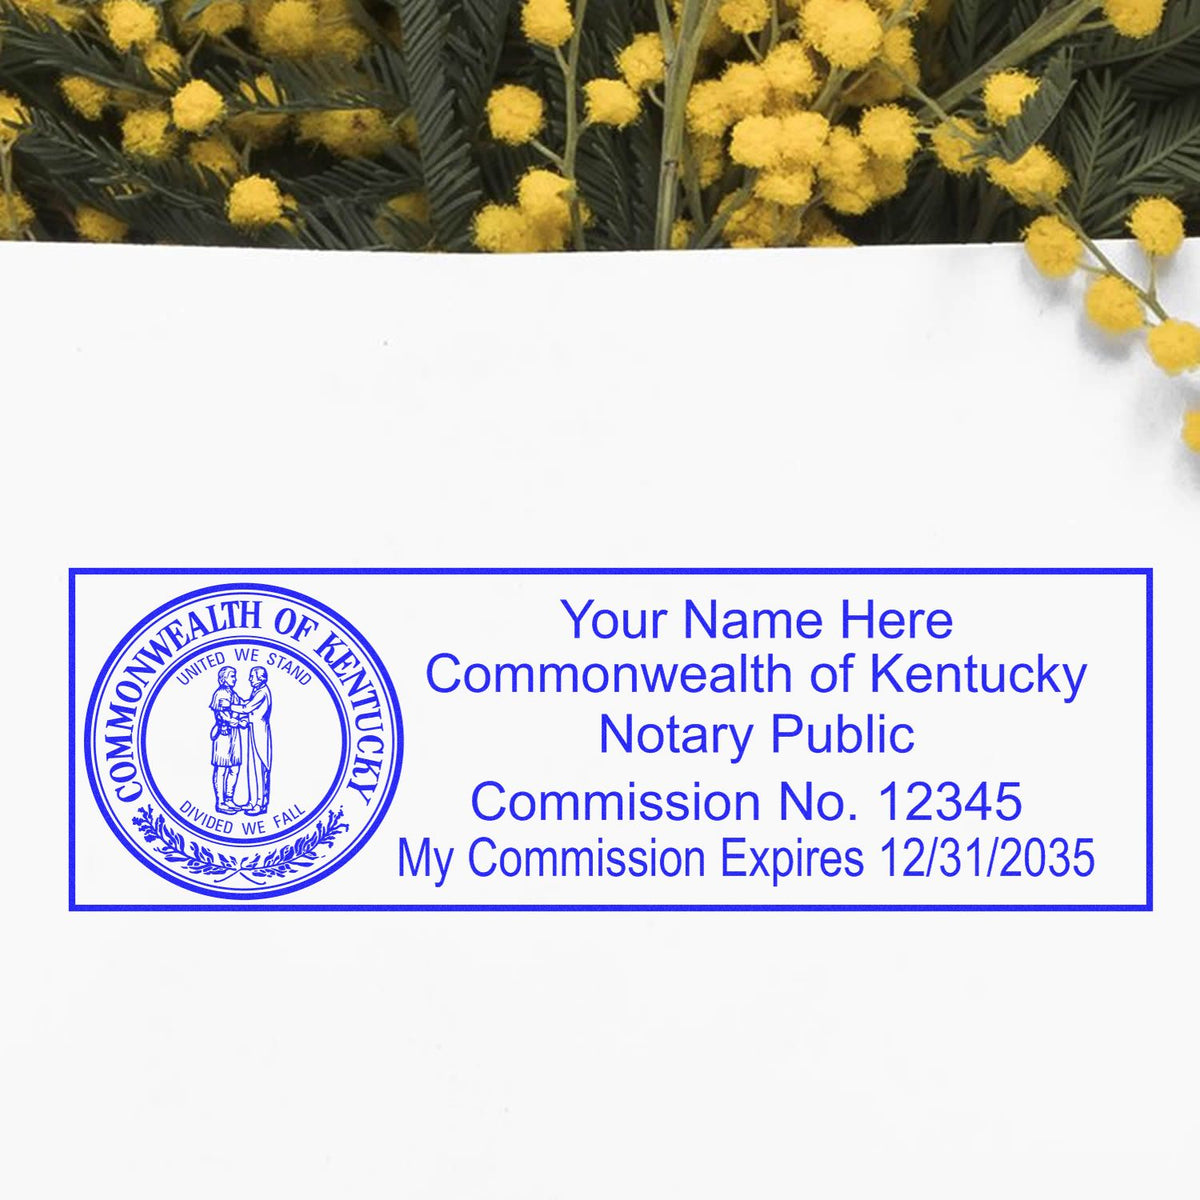 This paper is stamped with a sample imprint of the Slim Pre-Inked State Seal Notary Stamp for Kentucky, signifying its quality and reliability.